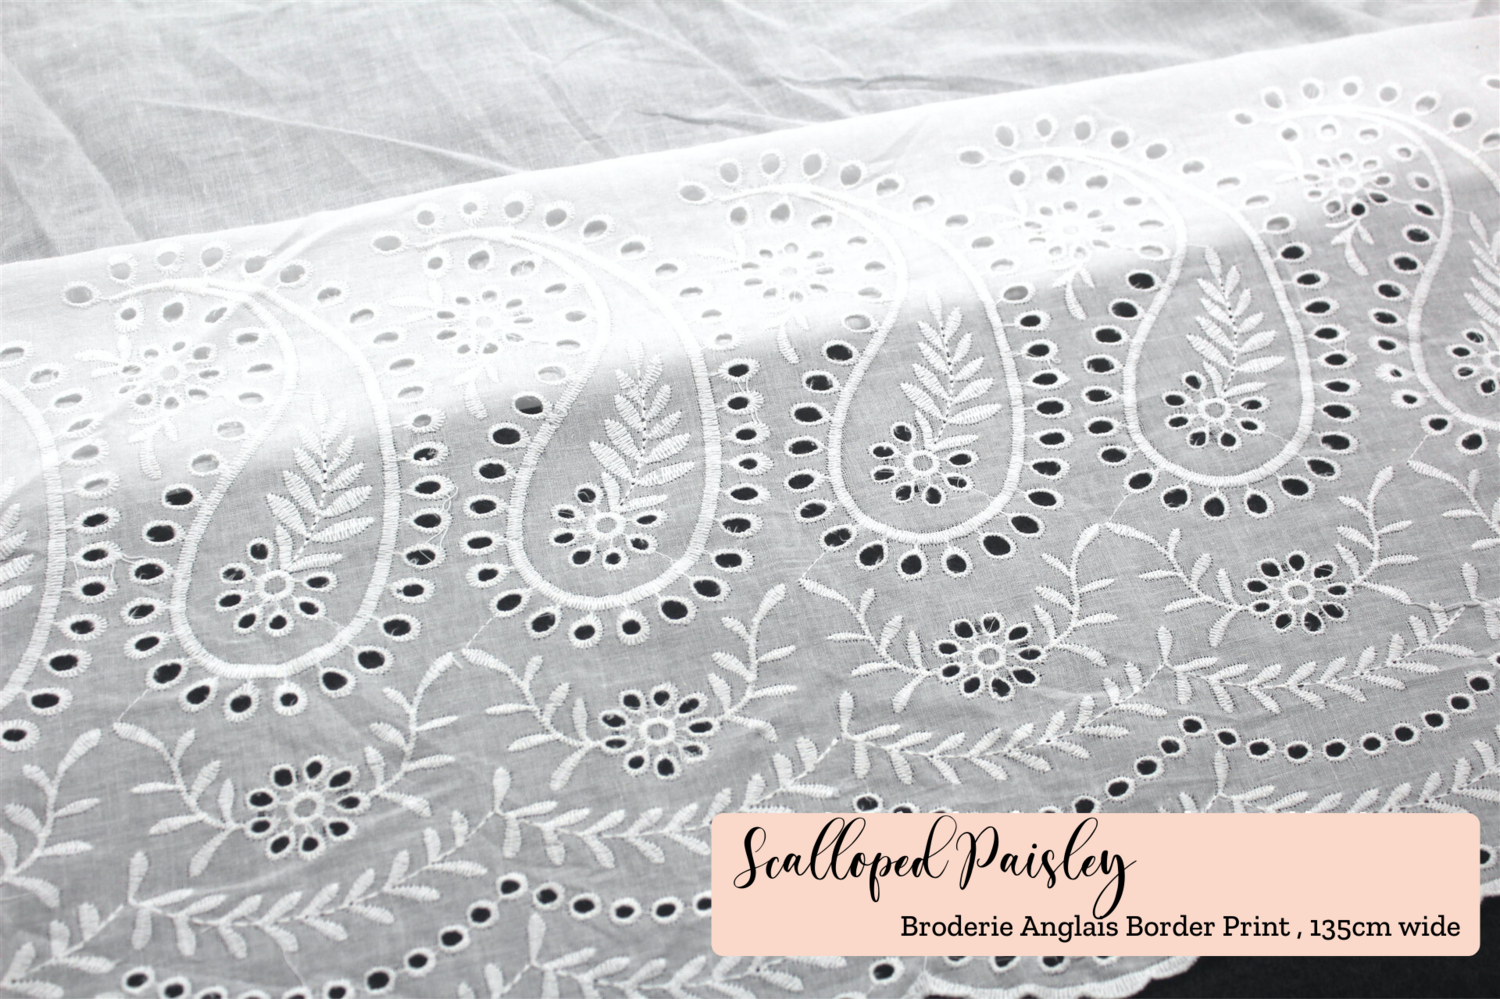 Scalloped Paisley | Broderie Anglais Border Print | 130cm Wide